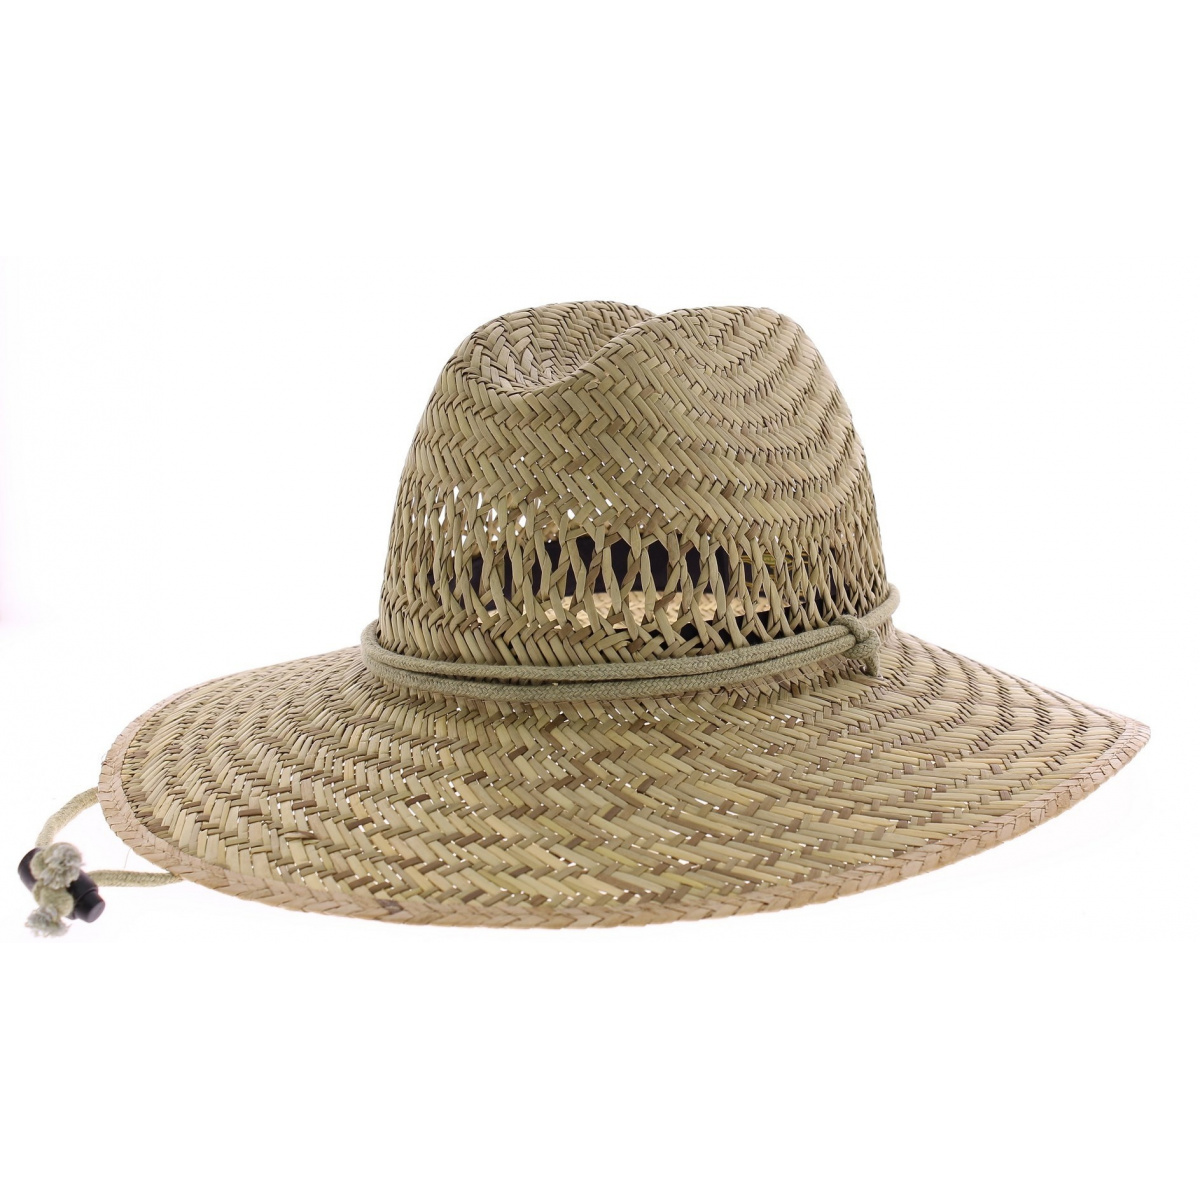 garden hat - straw hat purchase Reference : 4591